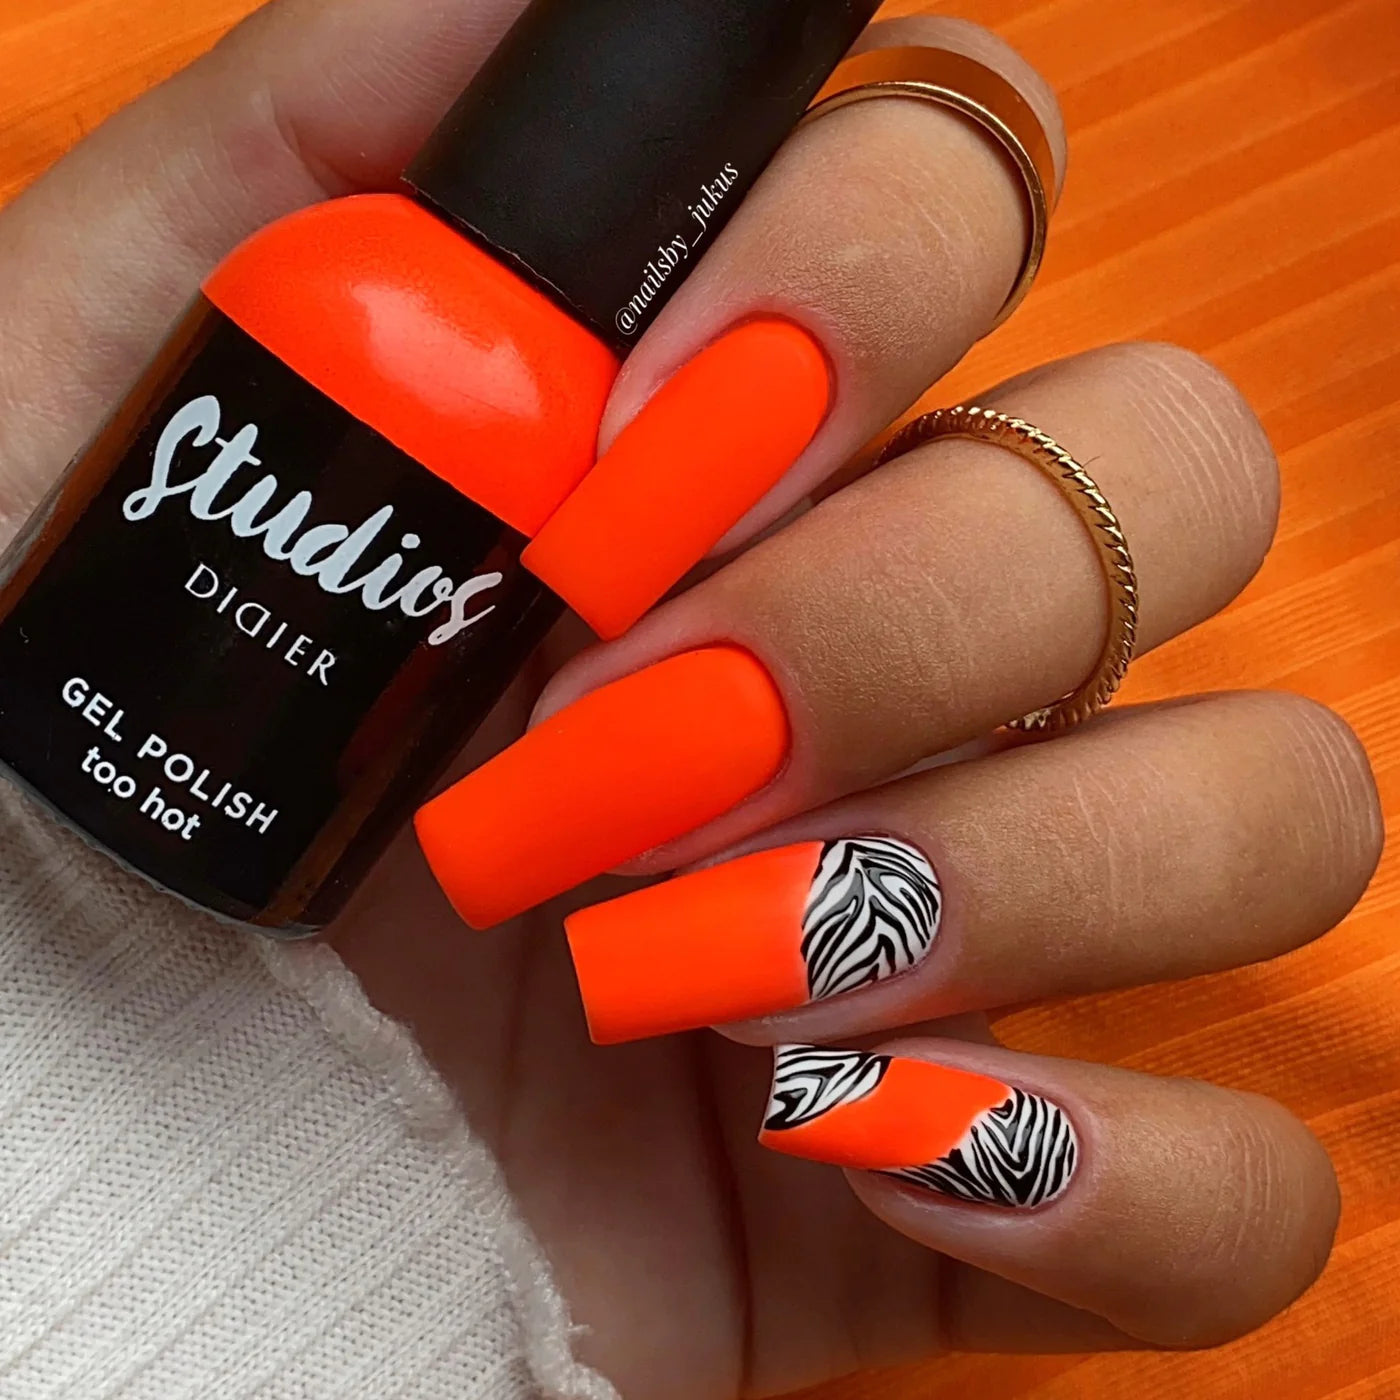 GEMS NAIL DESIGNS - Holiday ready nails in a glittery hot coral orange! # nails #nailart #gels #extensions #glitter #magpiebeauty #magpienails  #nailsofinstagram #nailsonfleek #nailsoftheday | Facebook